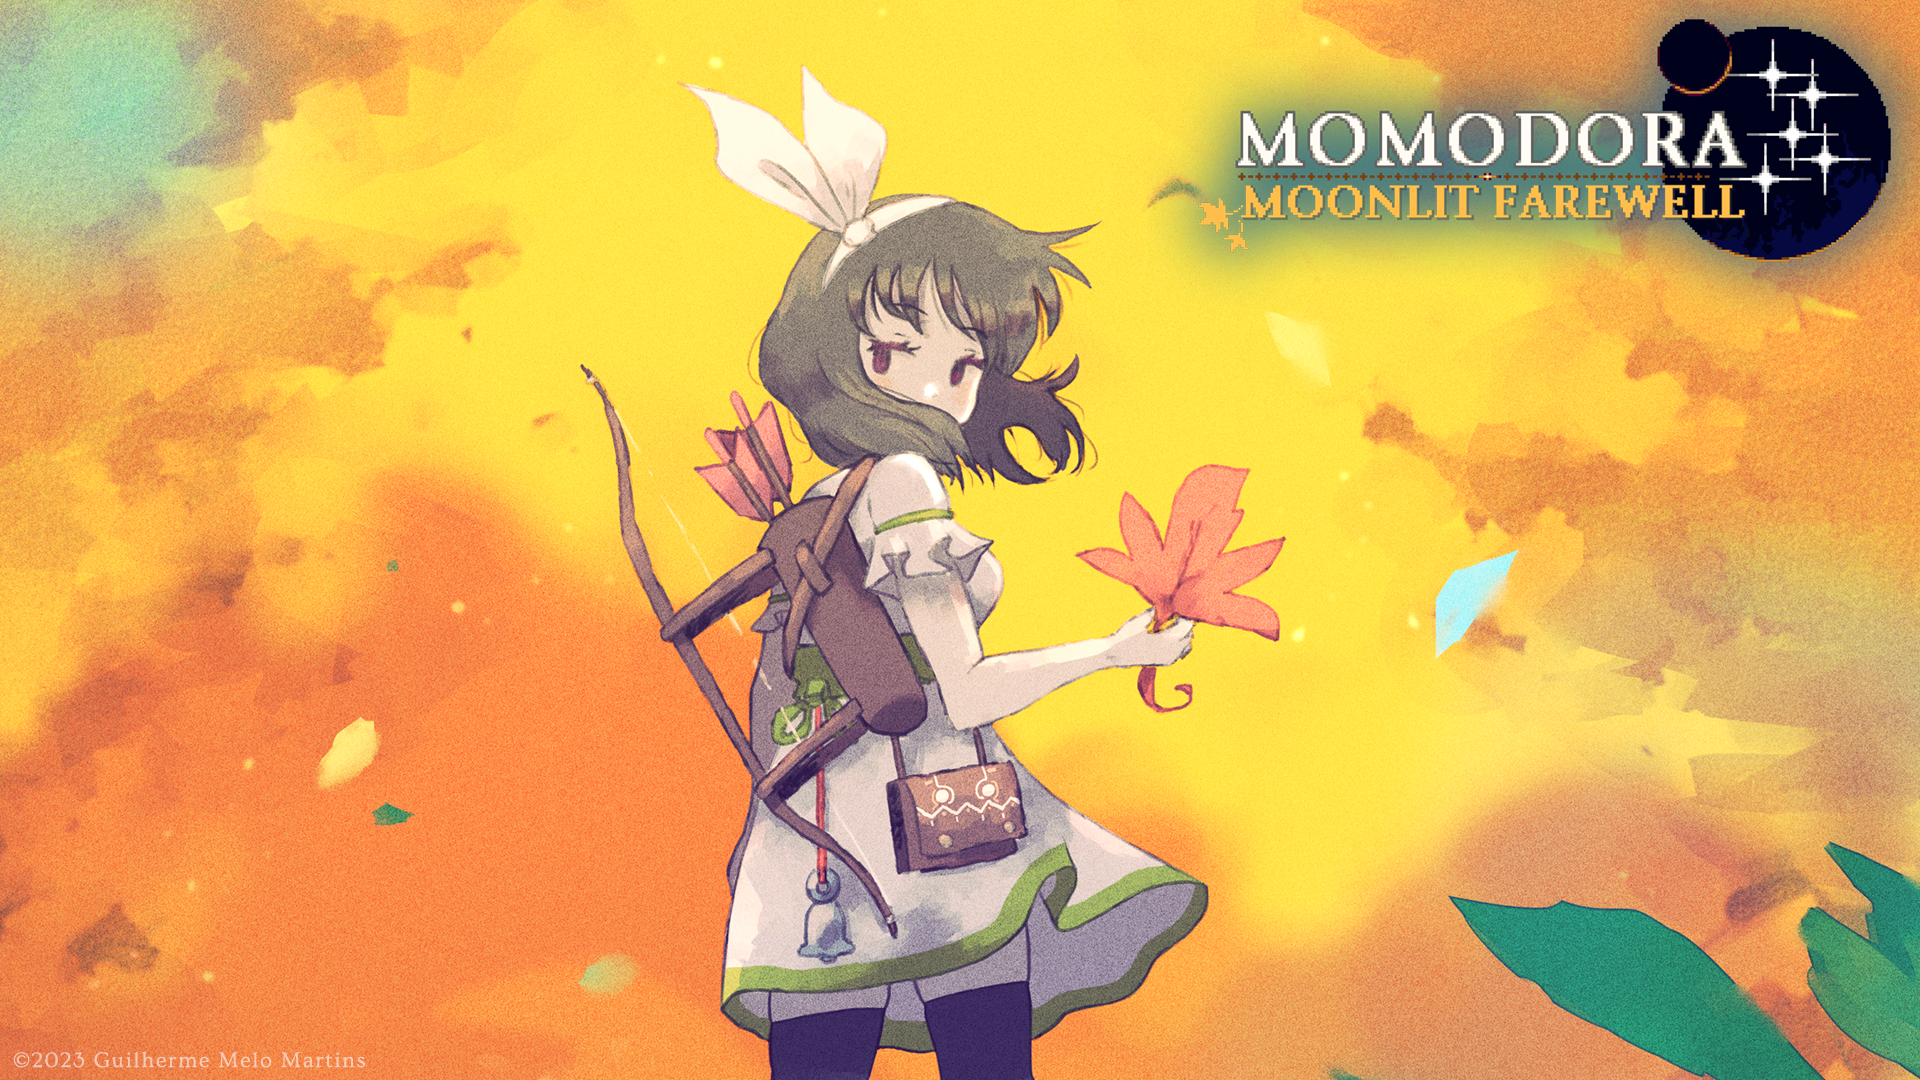 The Culmination of the Momodora Series—Momodora: Moonlit Farewell to Release on Steam on January 11, 2024!